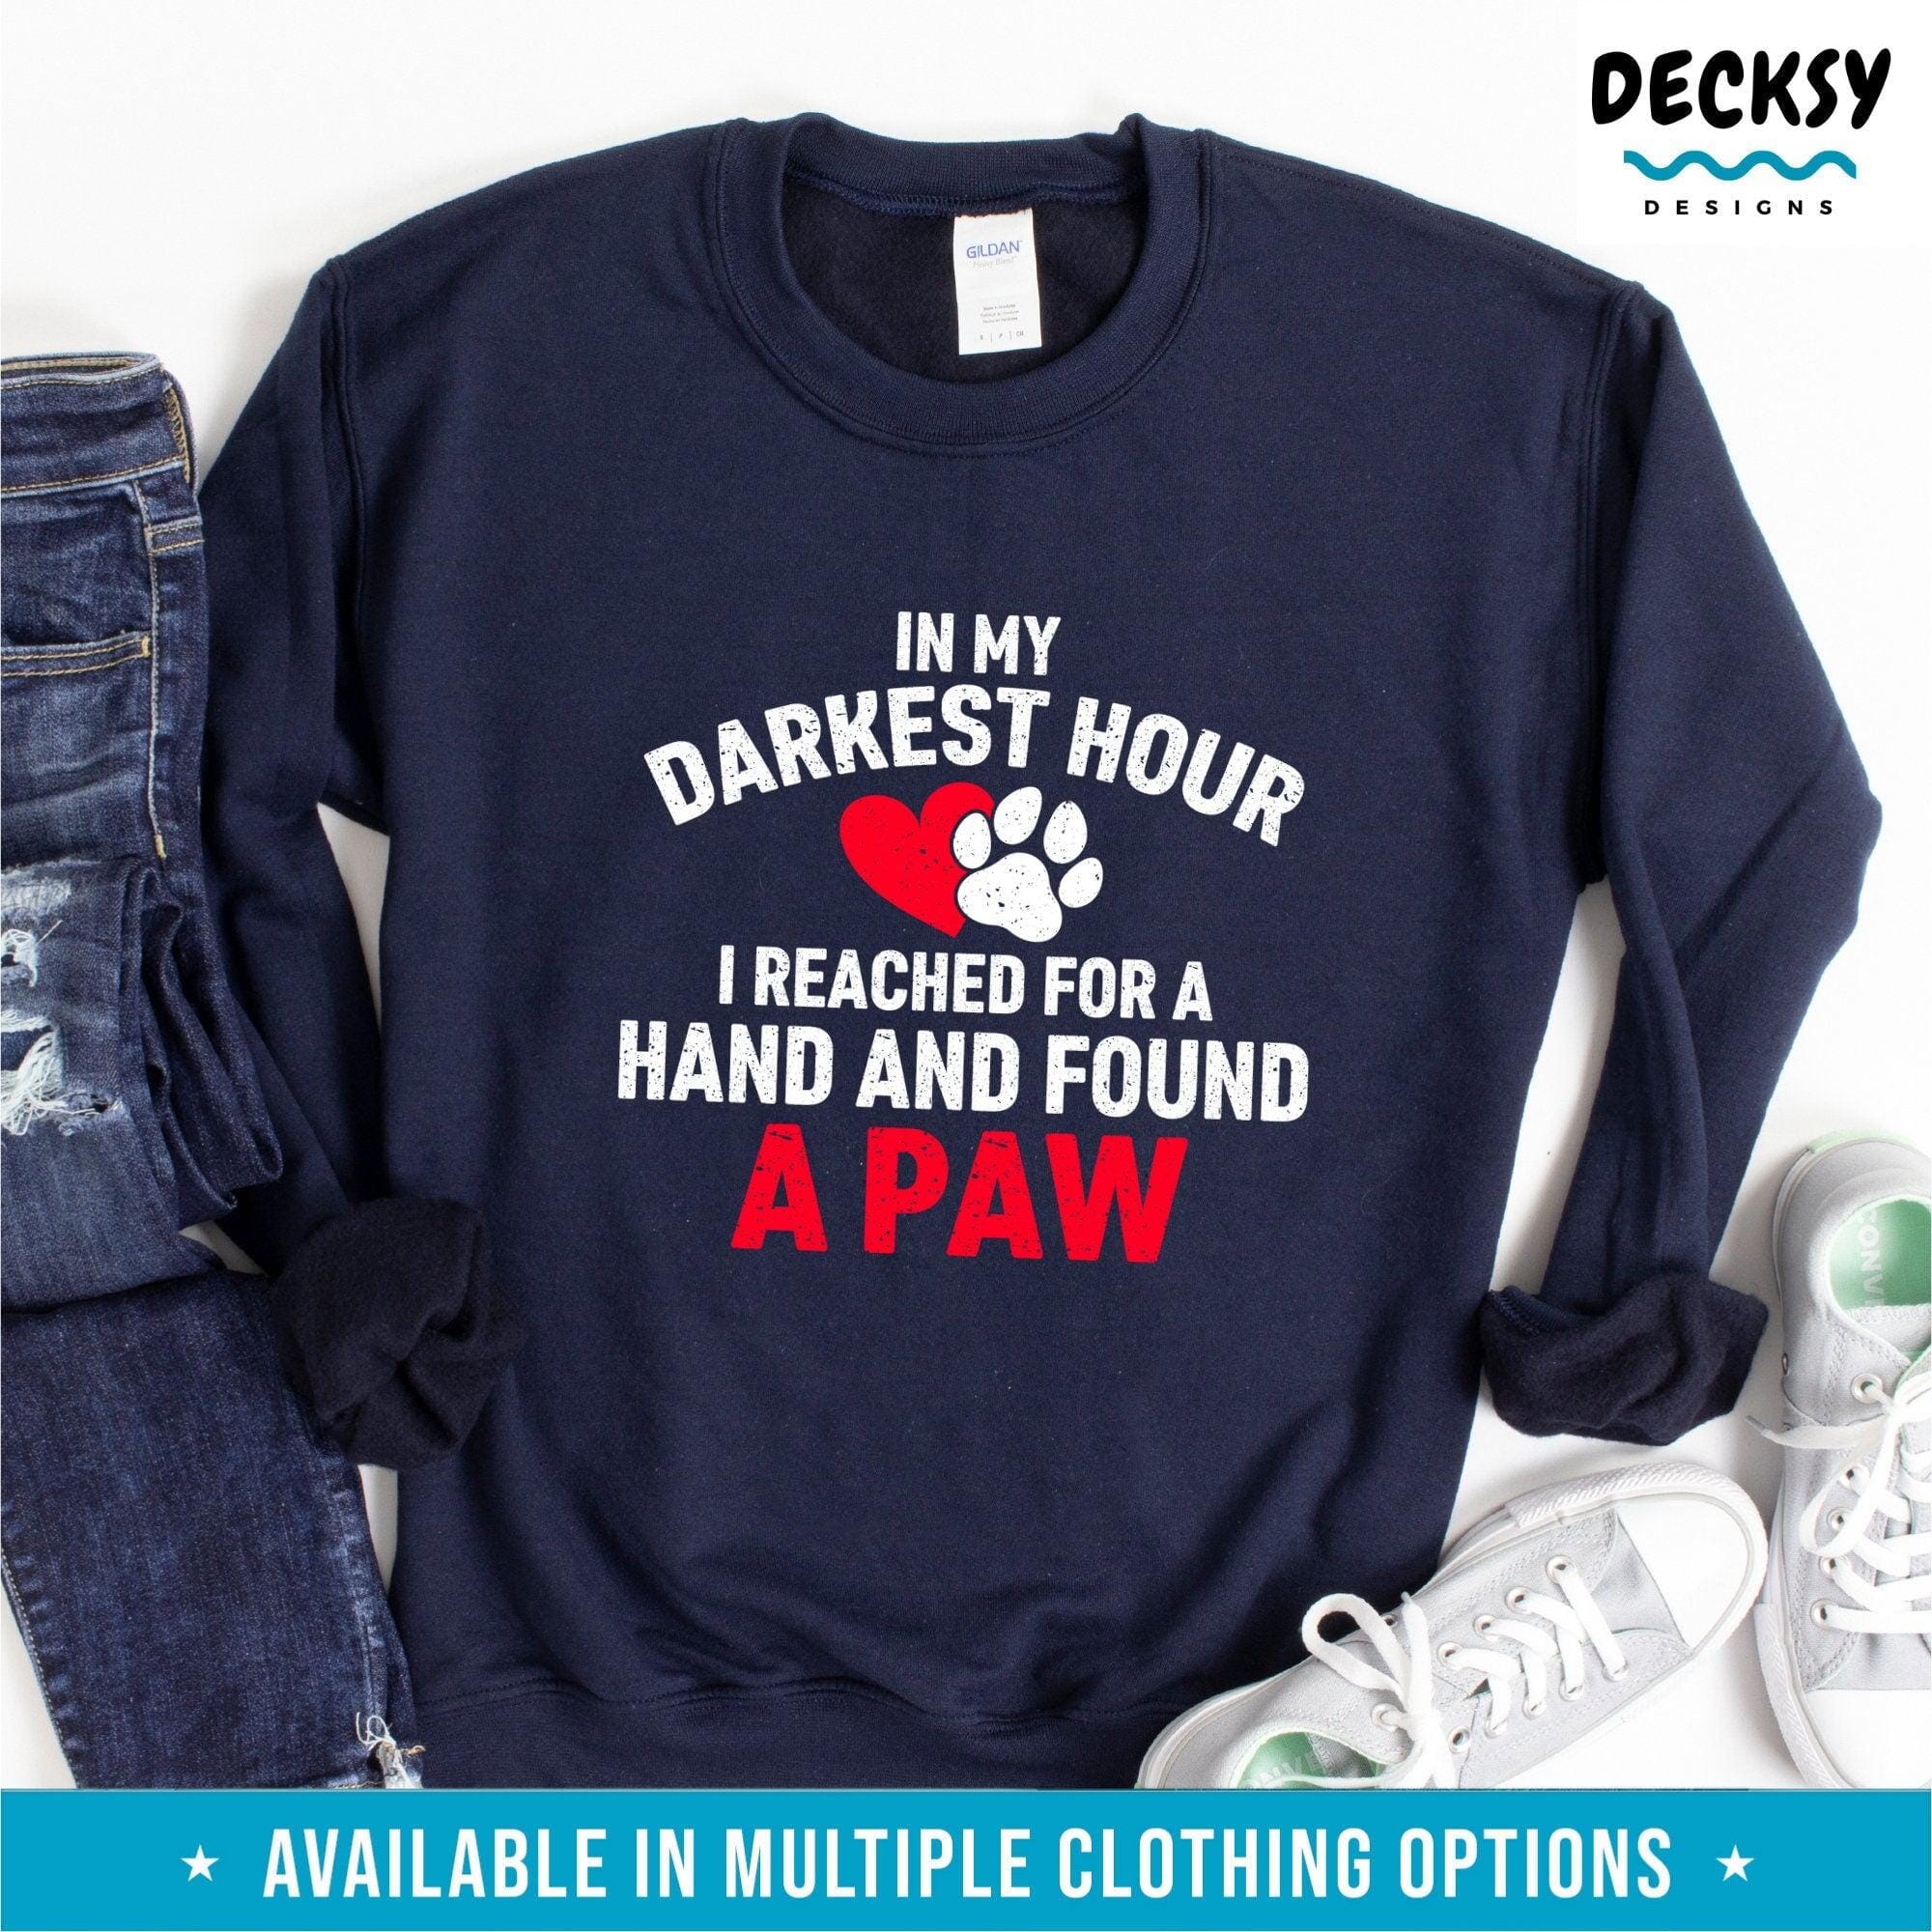 Pet Adoption Shirt, Dog Lover Gift-Clothing:Gender-Neutral Adult Clothing:Tops & Tees:T-shirts:Graphic Tees-DecksyDesigns